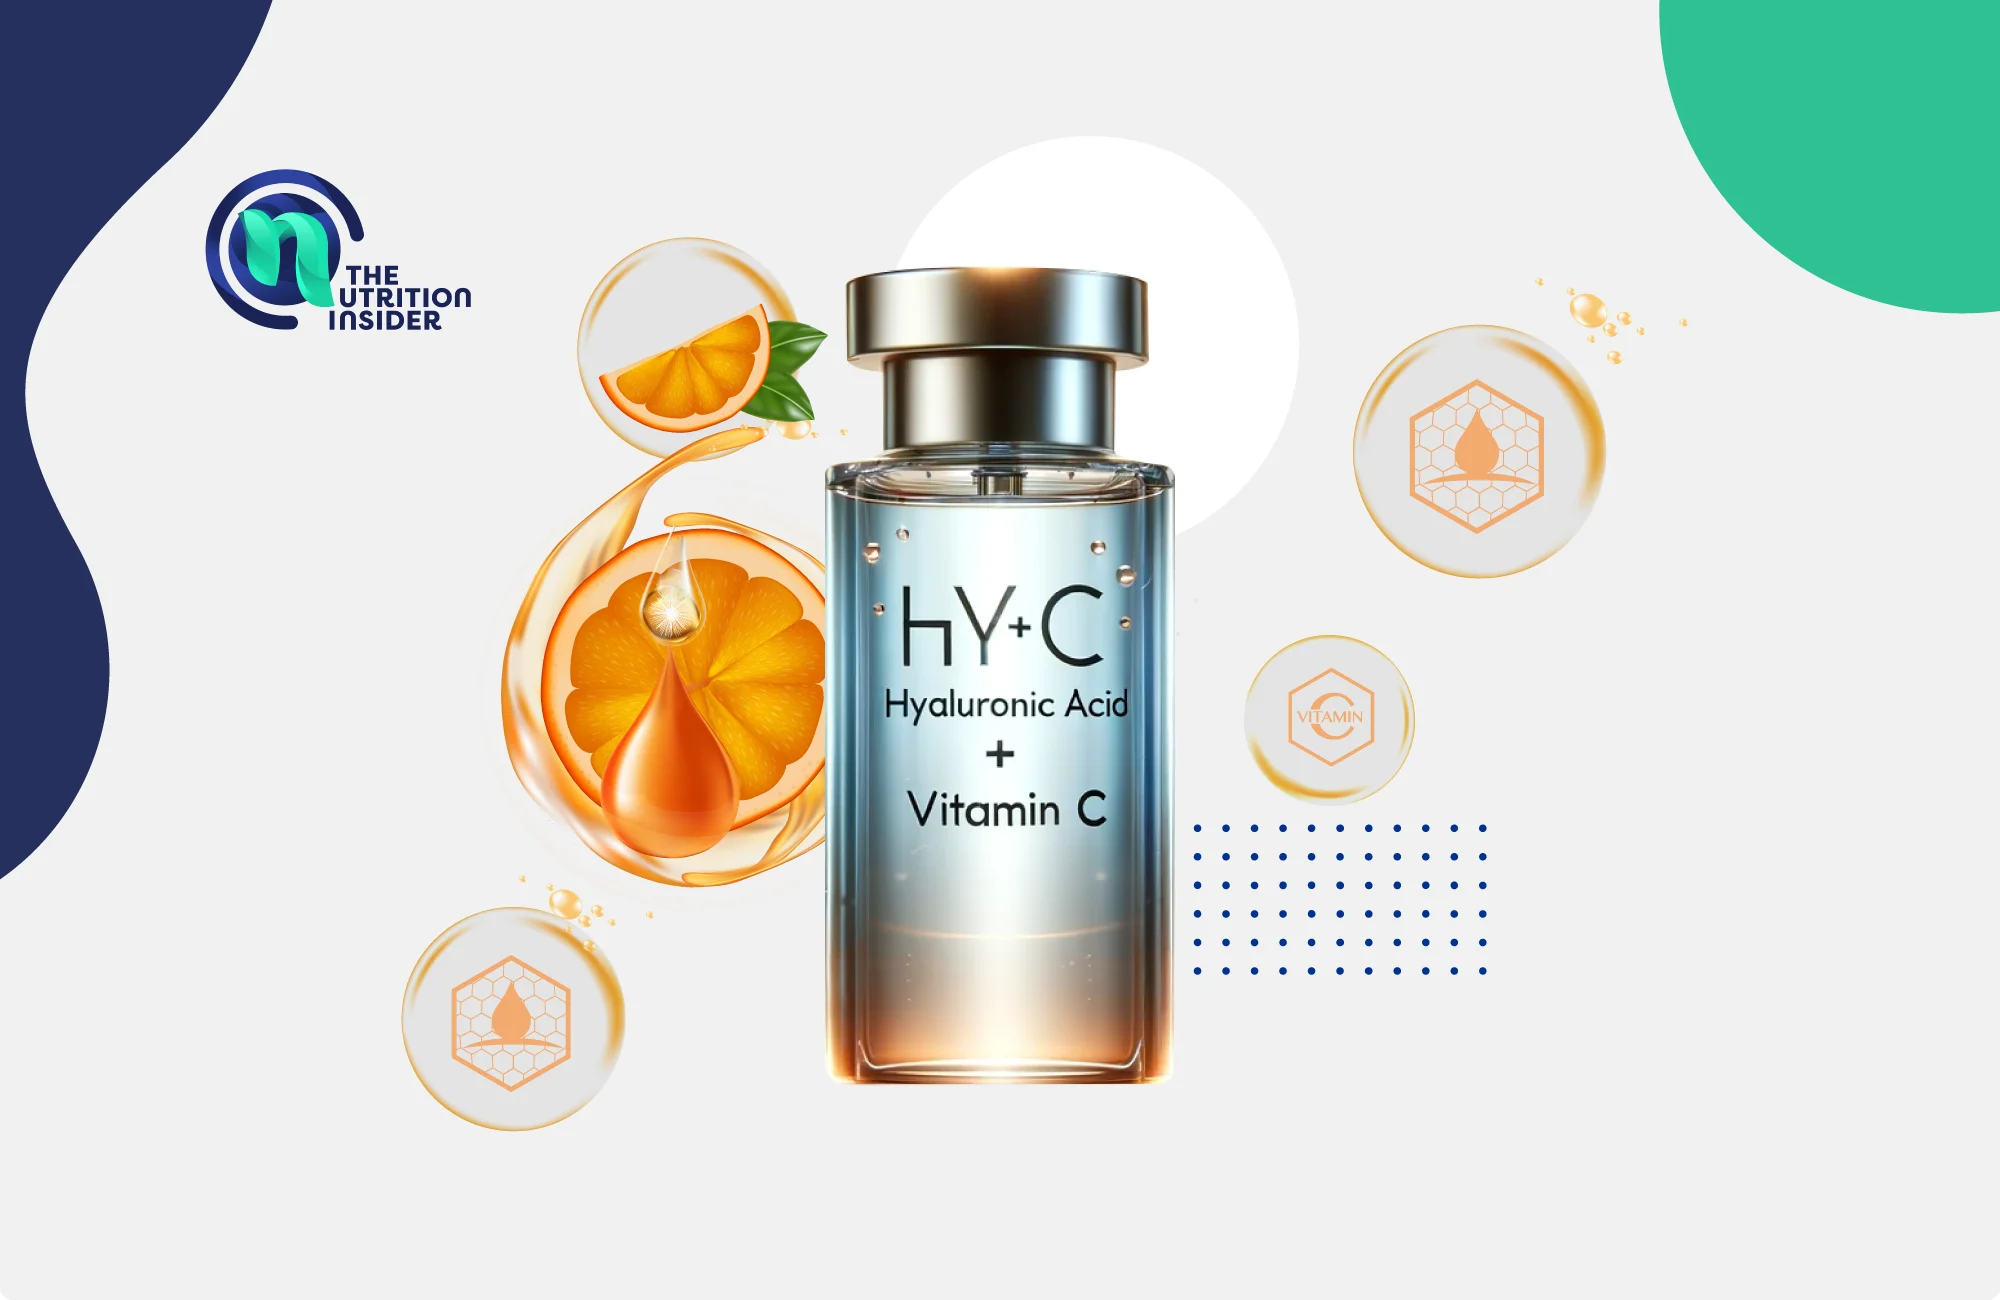 Vitamin C and Hyaluronic Acid